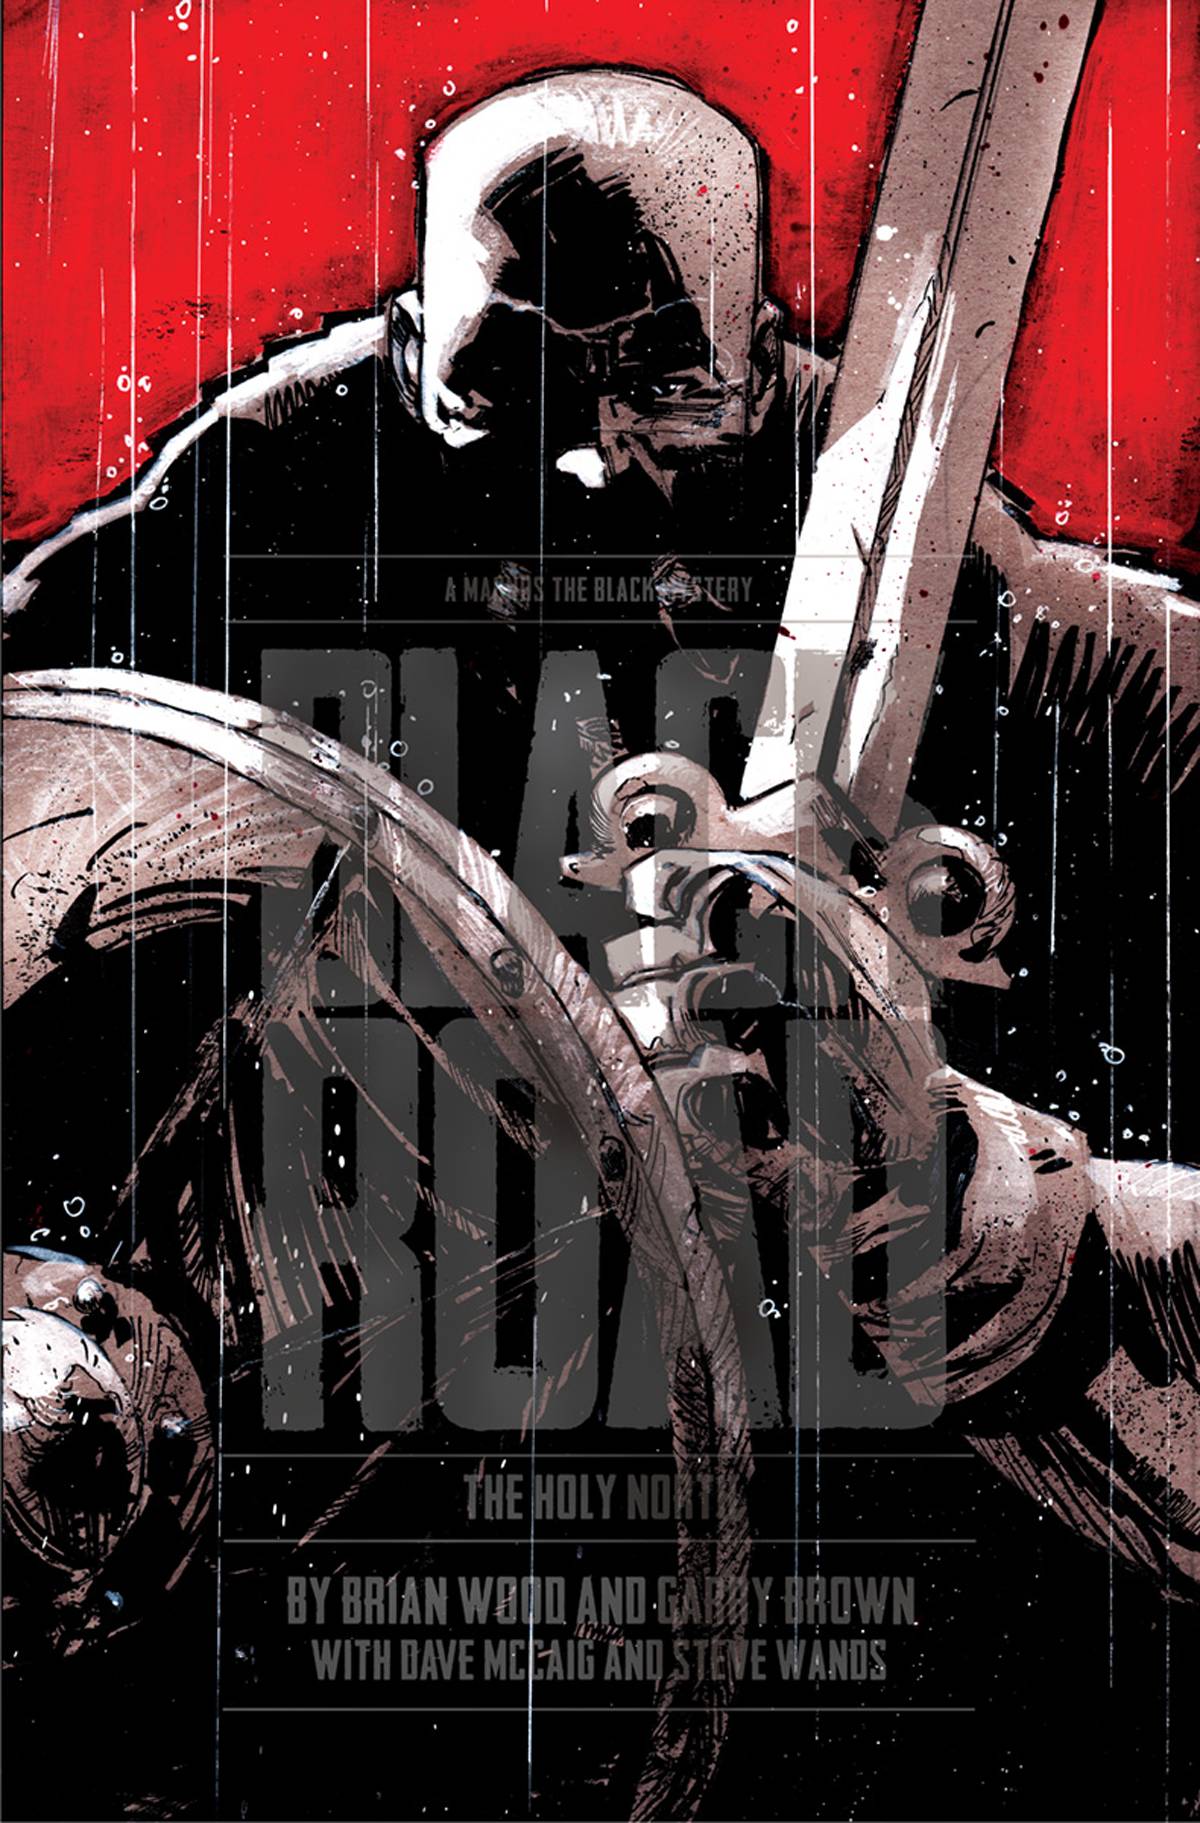 Black Road Holy North Hardcover (Mature)